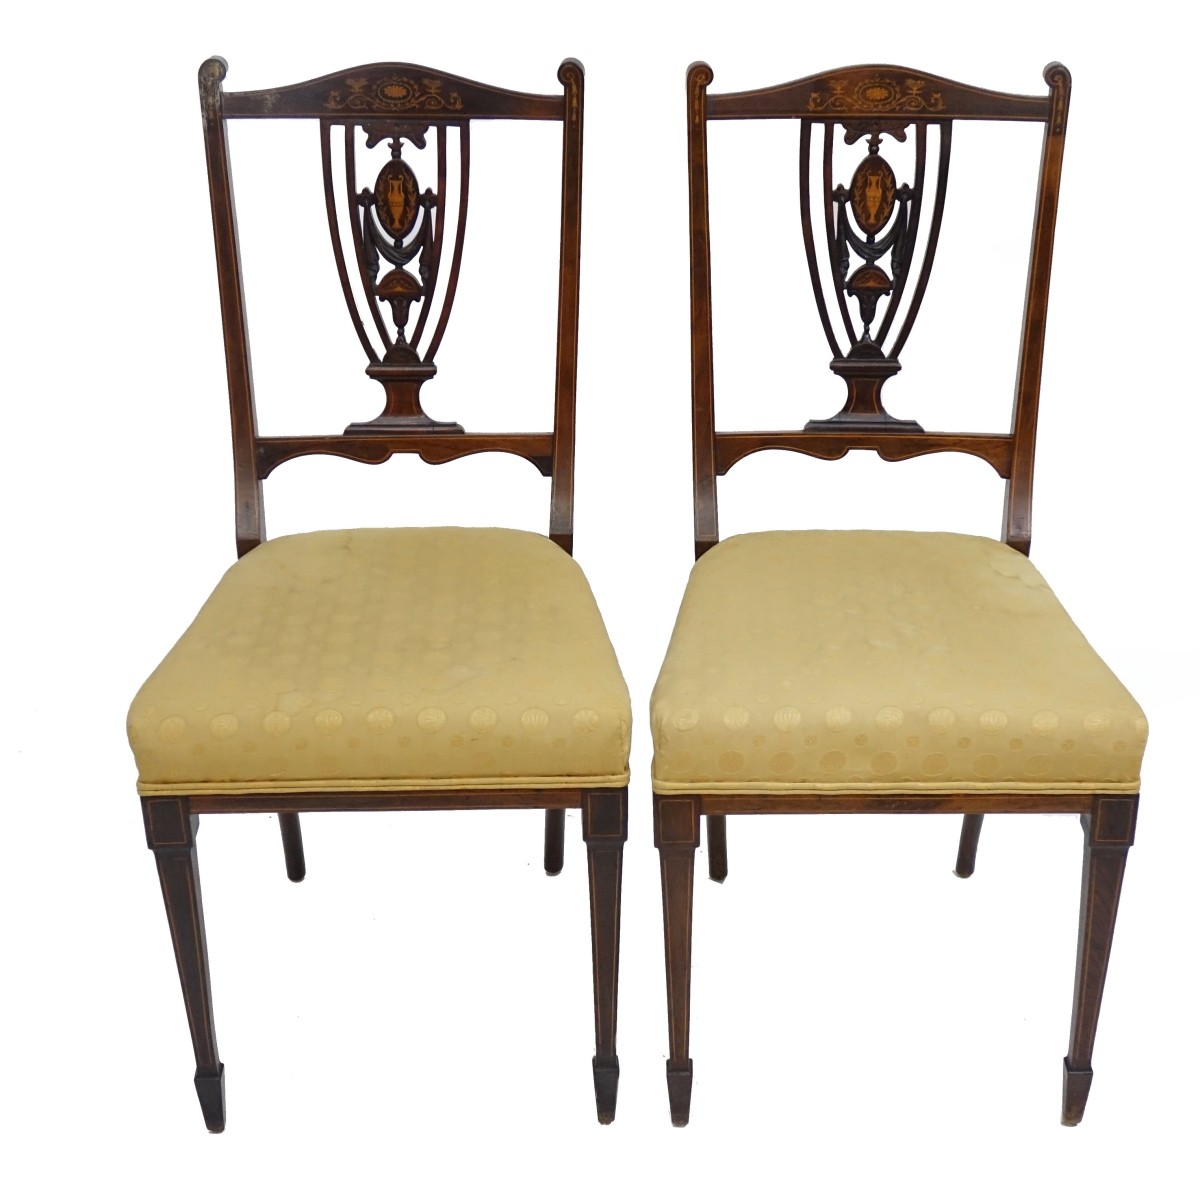 Two Edwardian Inlaid Chairs